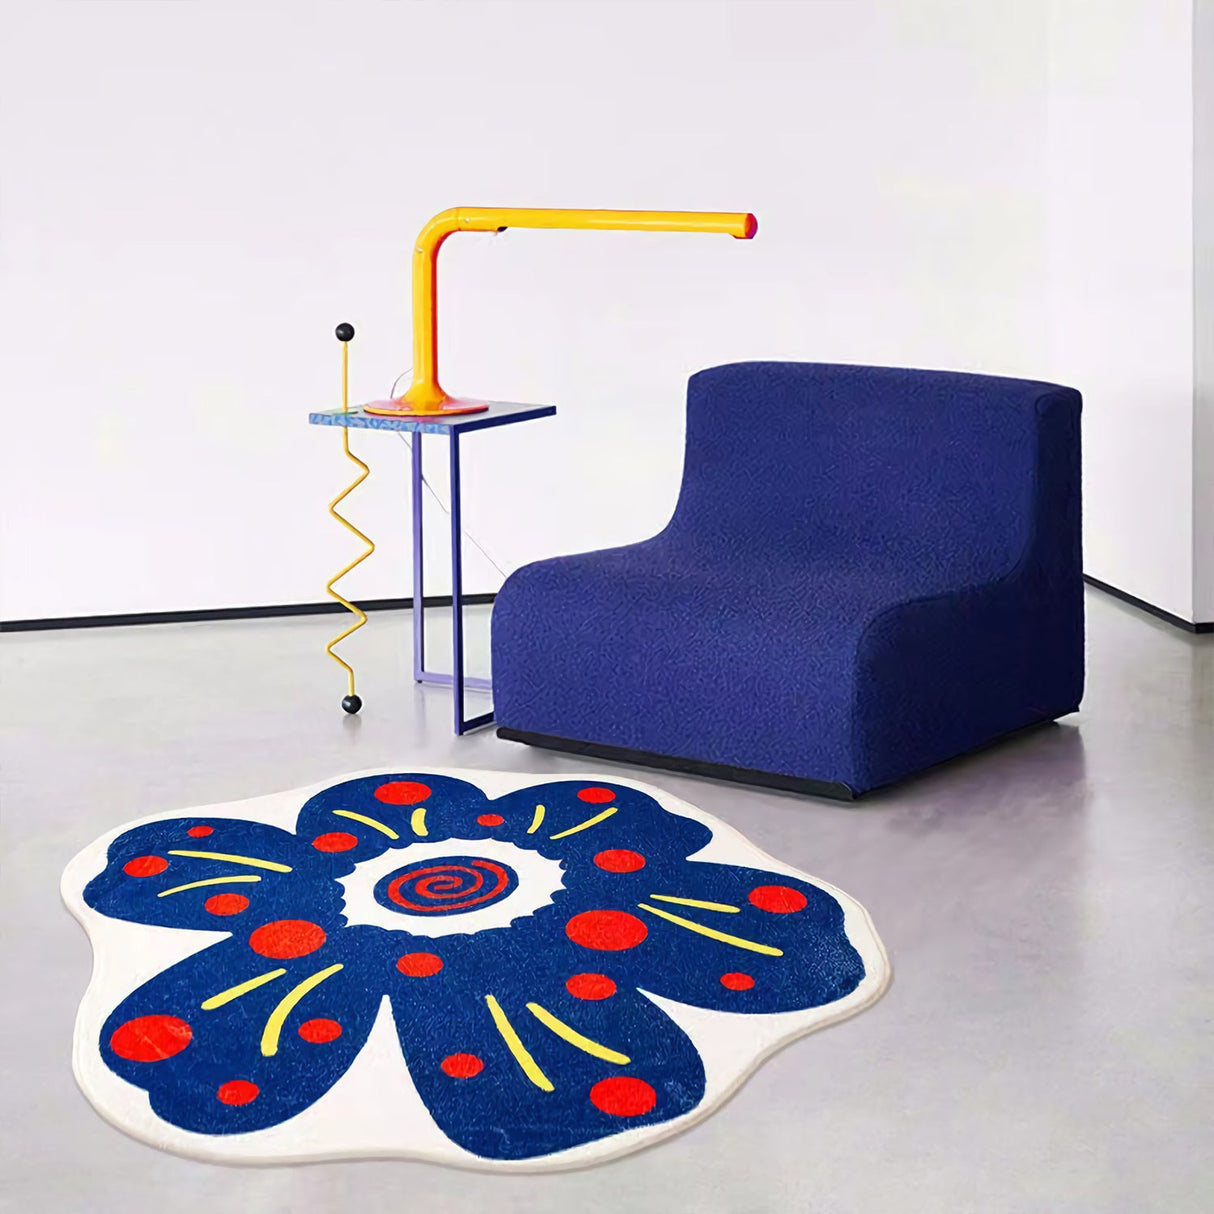 Colorful Floral Irragular Shaped Rugs